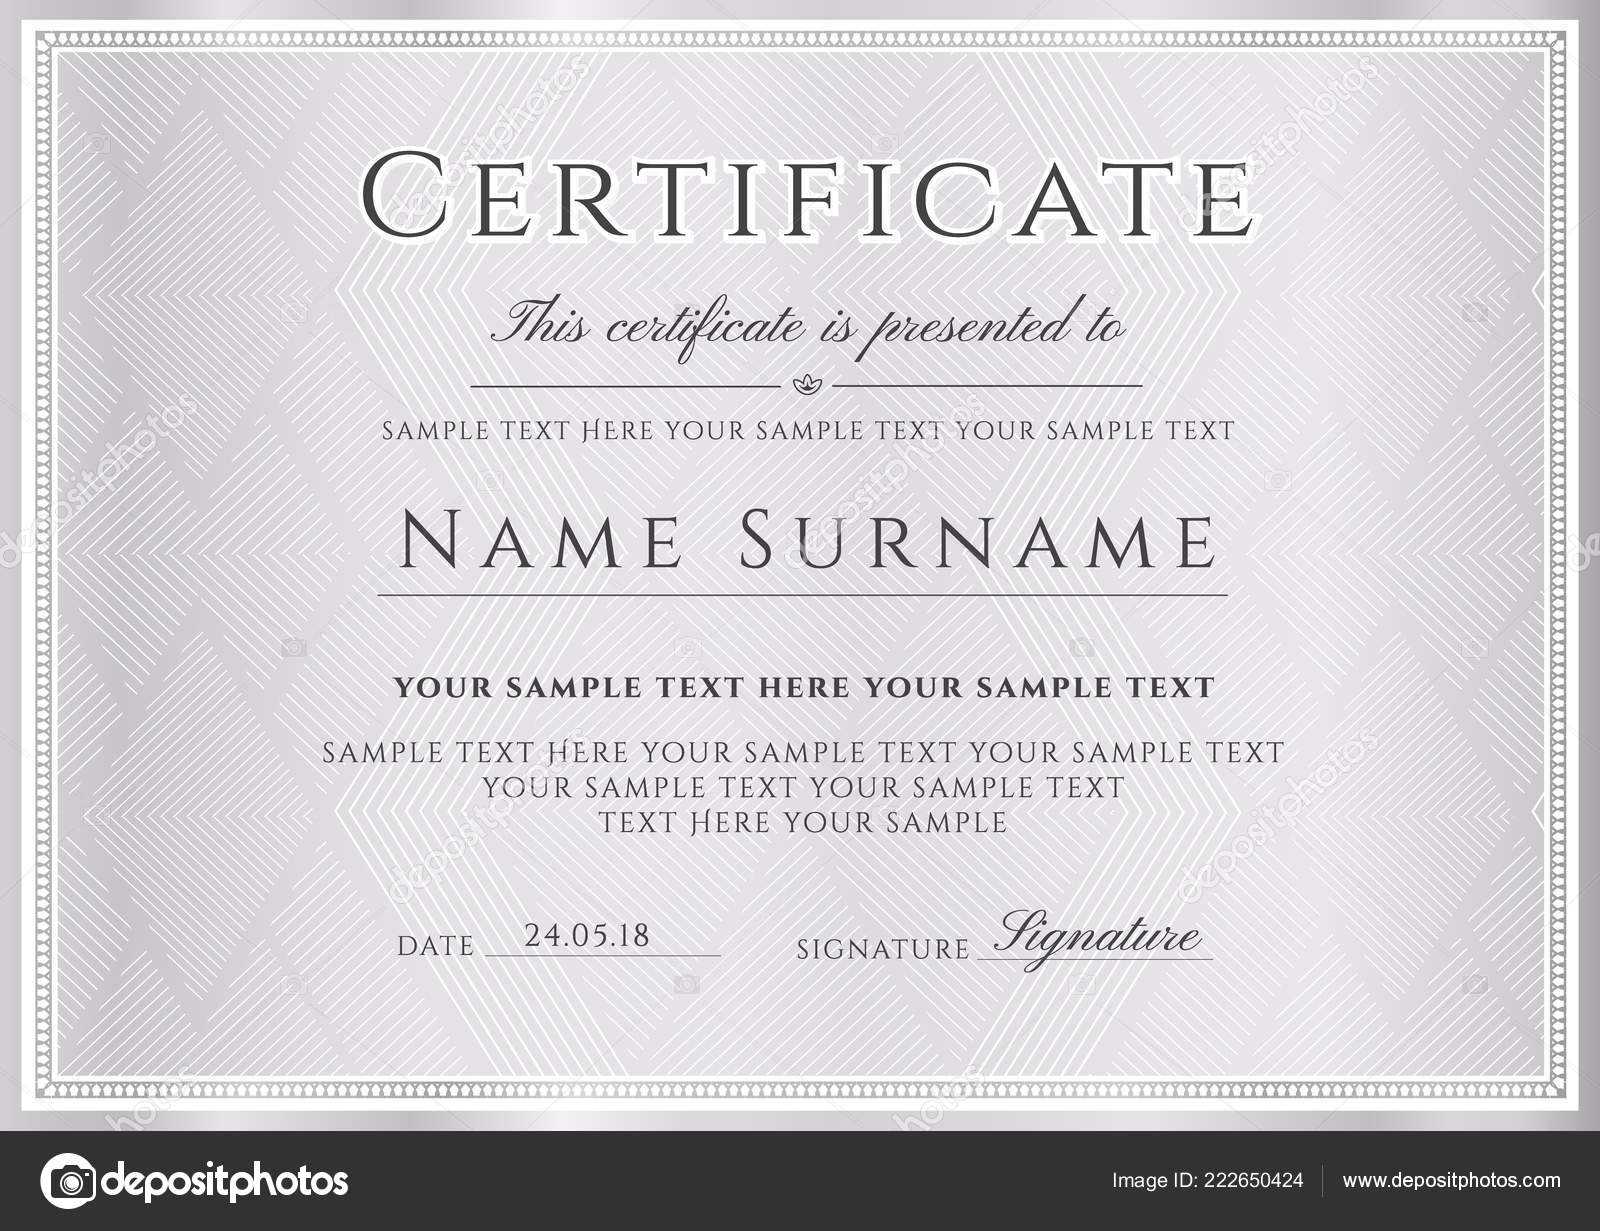 Certificate Vector Template Formal Silver Border Geometric With Regard To Formal Certificate Of Appreciation Template